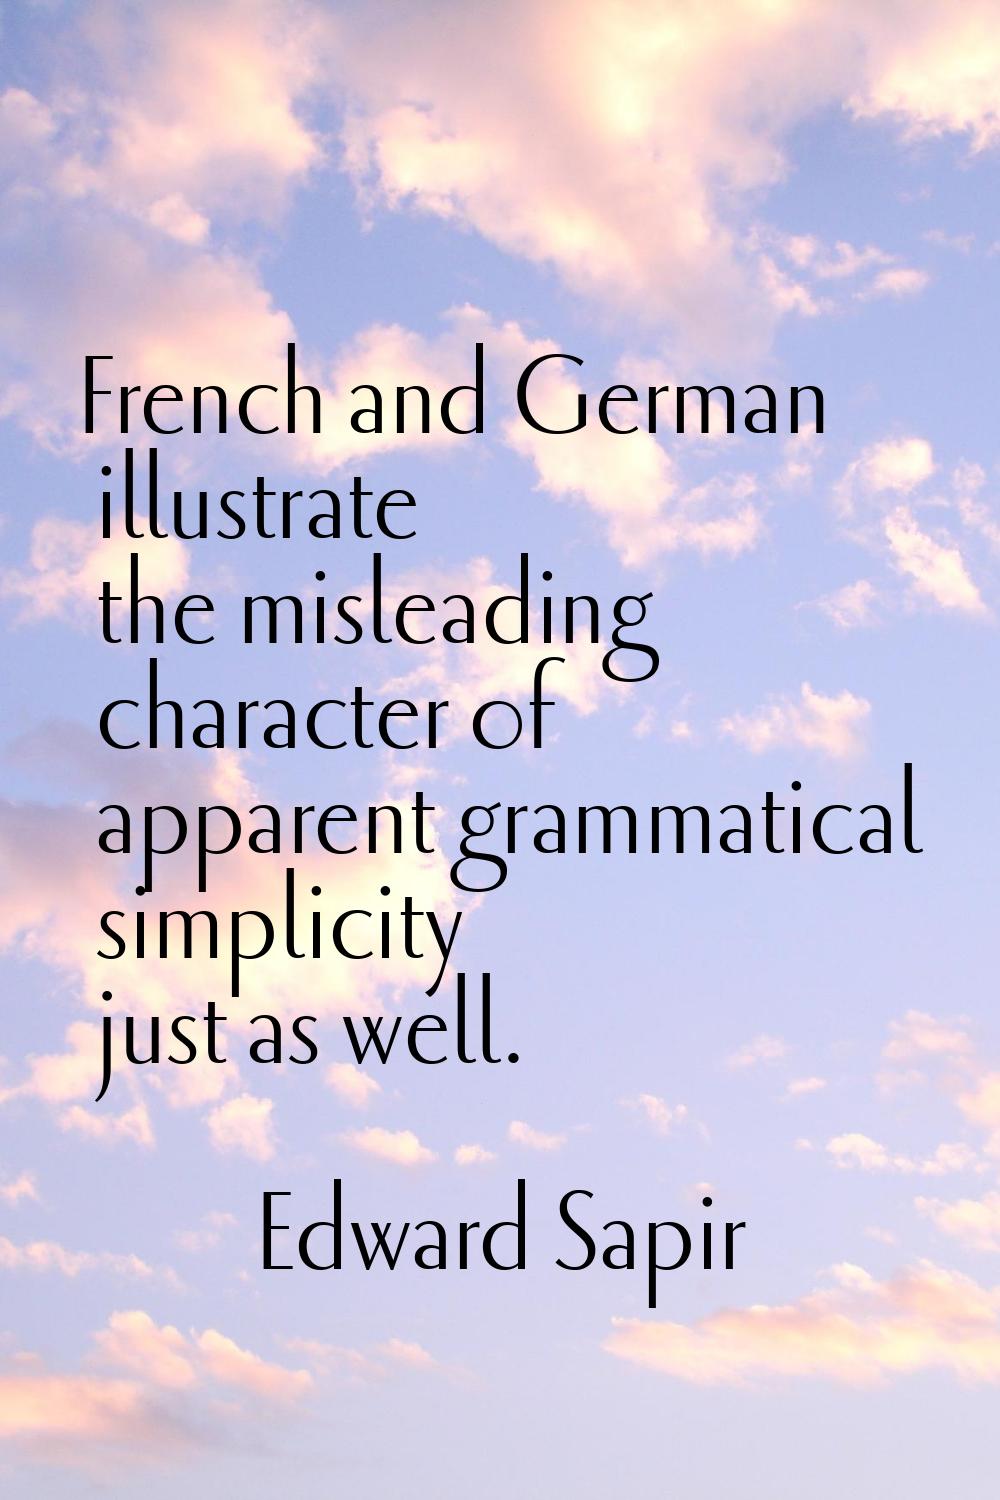 French and German illustrate the misleading character of apparent grammatical simplicity just as we